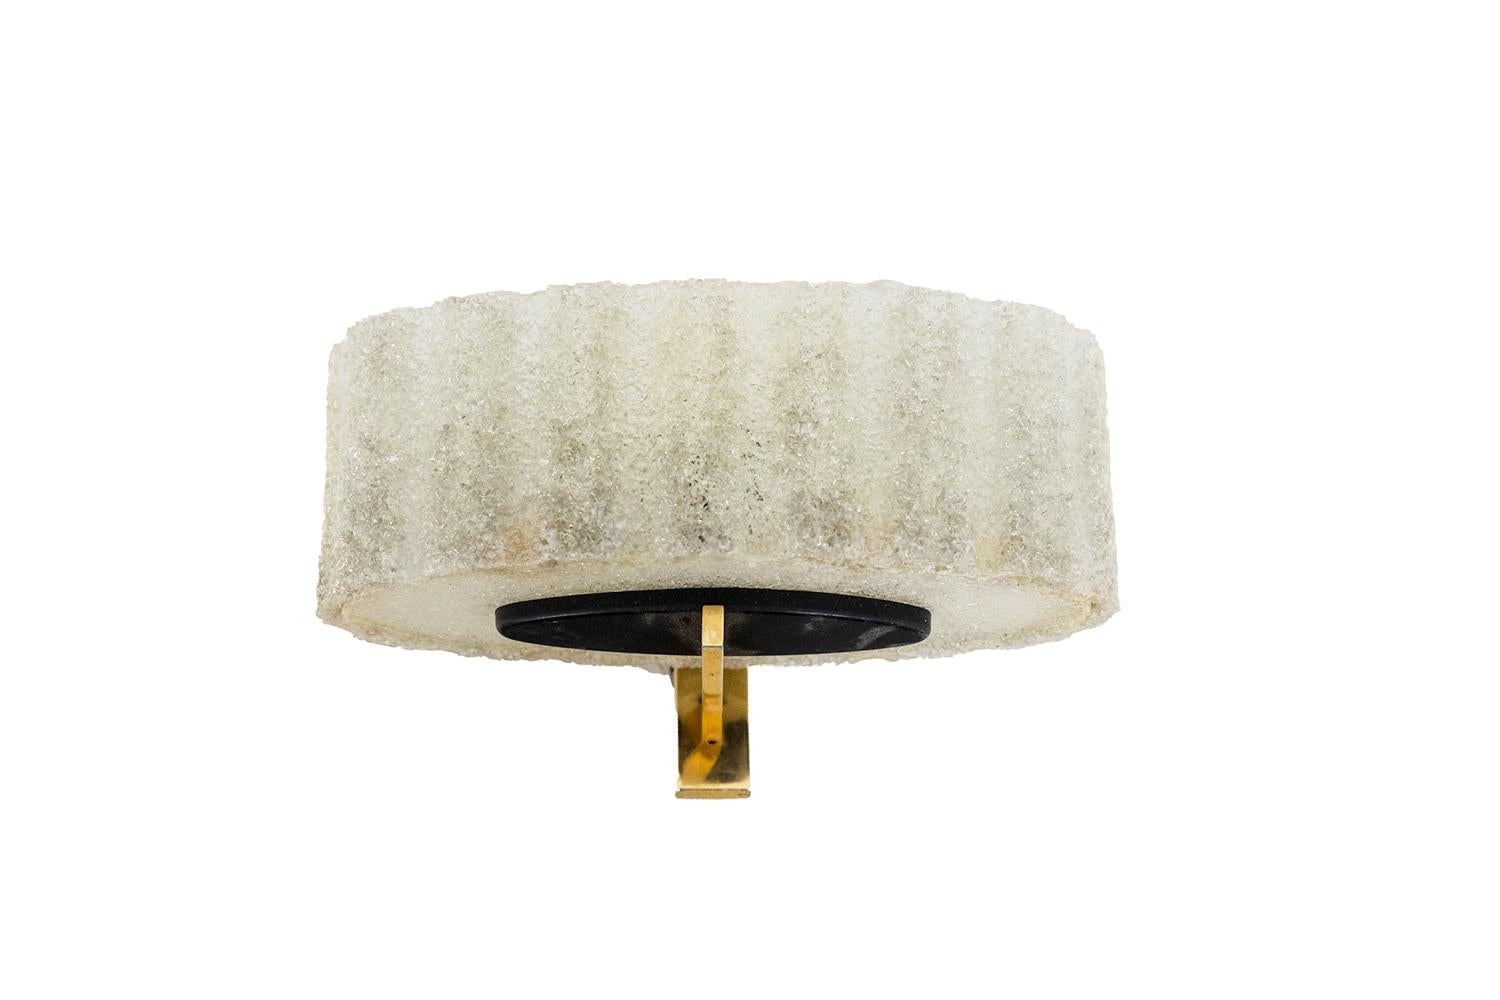 Maison Arlus, by.

Wall lamp in granite resin, golden brass and black lacquered metal, oval shape.

French work from the 1960s.

New and functional electricity. Works with an E- socket.

Dimensions: H x W x D cm

French work realized in the